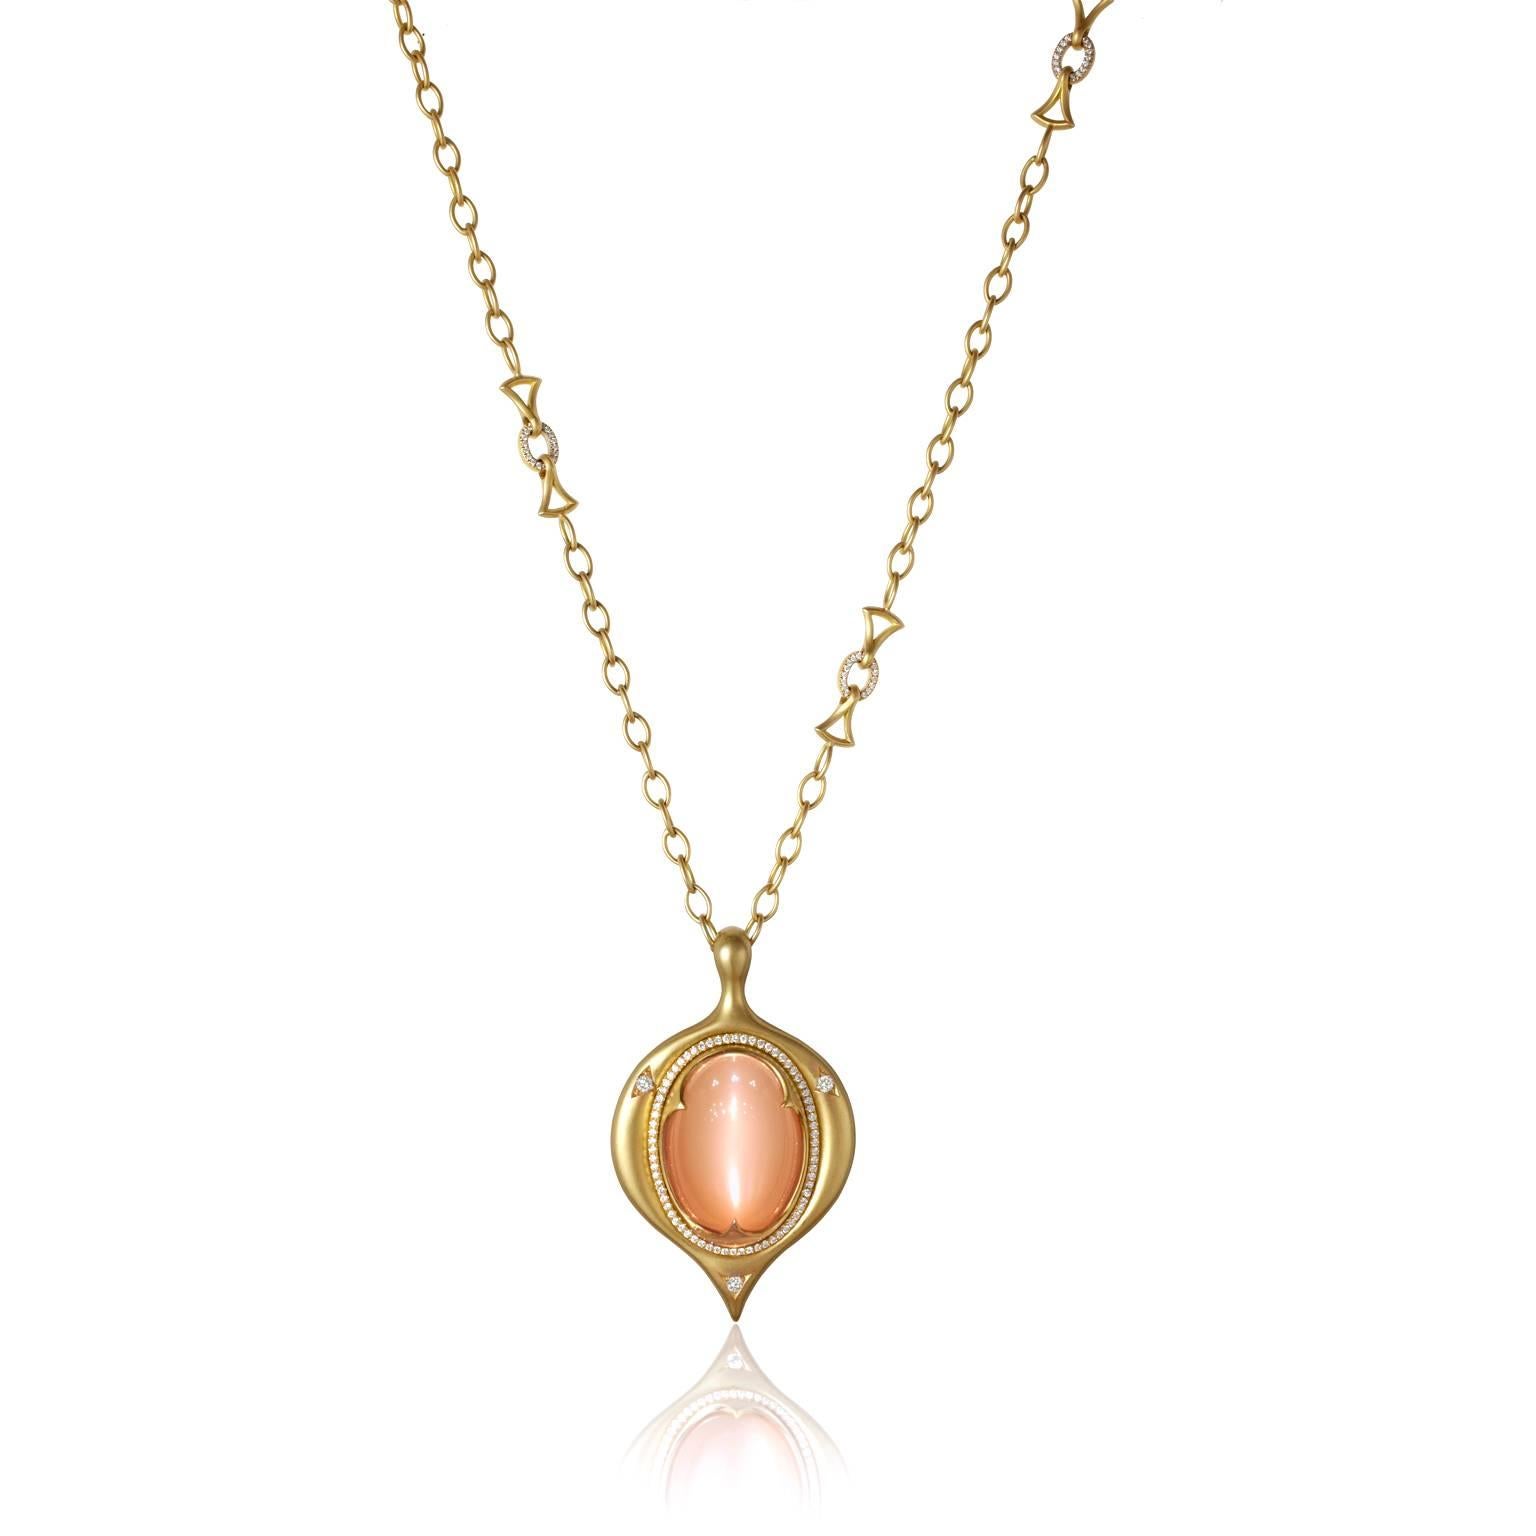 One-of-a-Kind Amulet Necklace handcrafted in matte-finished and satin-finished 18k yellow gold featuring a rare 39.00 carat peach moonstone exhibiting a sensational, glowing cat's-eye that truly can't be captured in pictures. 

The Amulet is adorned